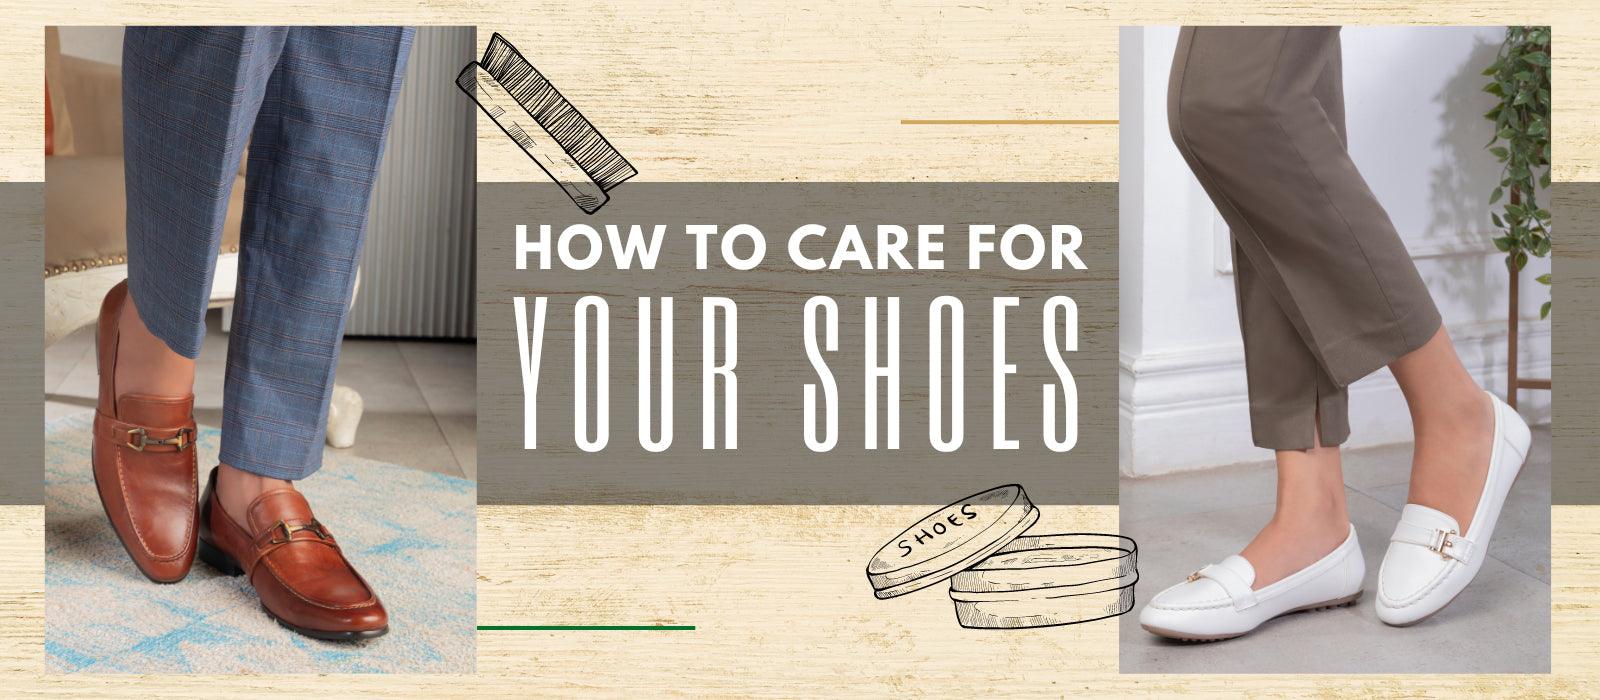 How To Care For Footwear – The 10 Tips To Follow - Tresmode